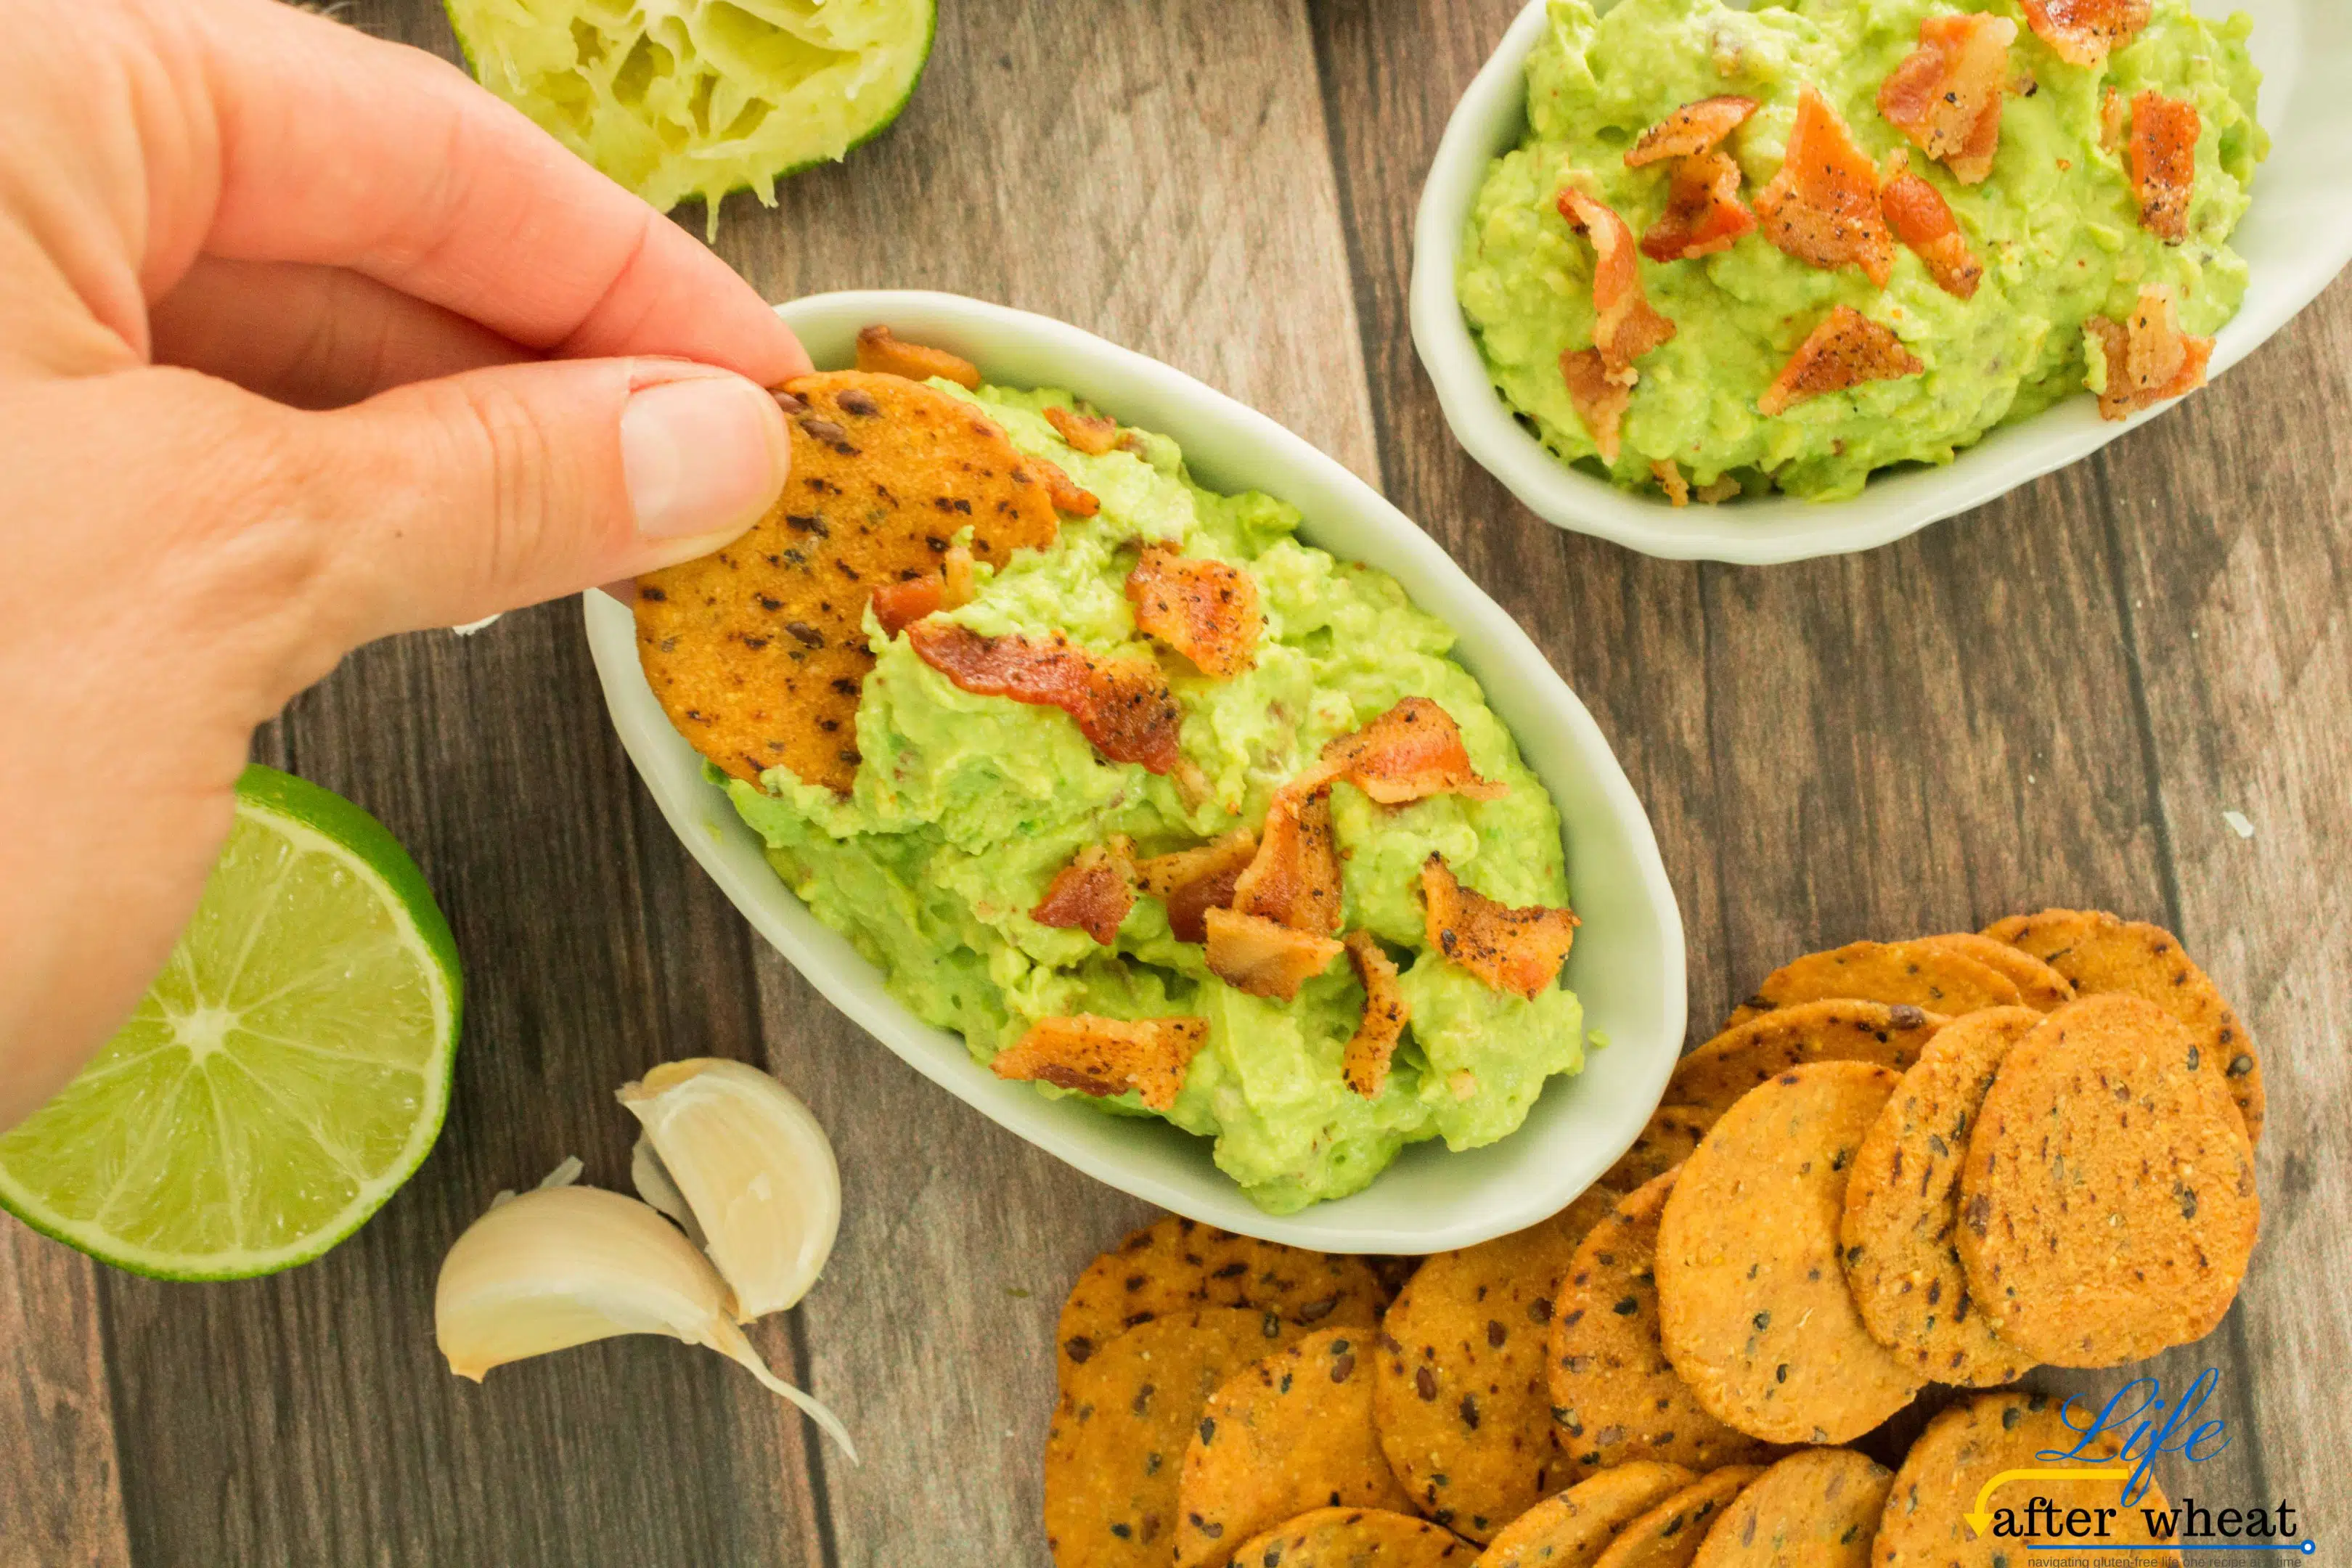 a hand dipping a chip into Roasted Avocado & Bacon Guacamole, next to lime wedges and chips